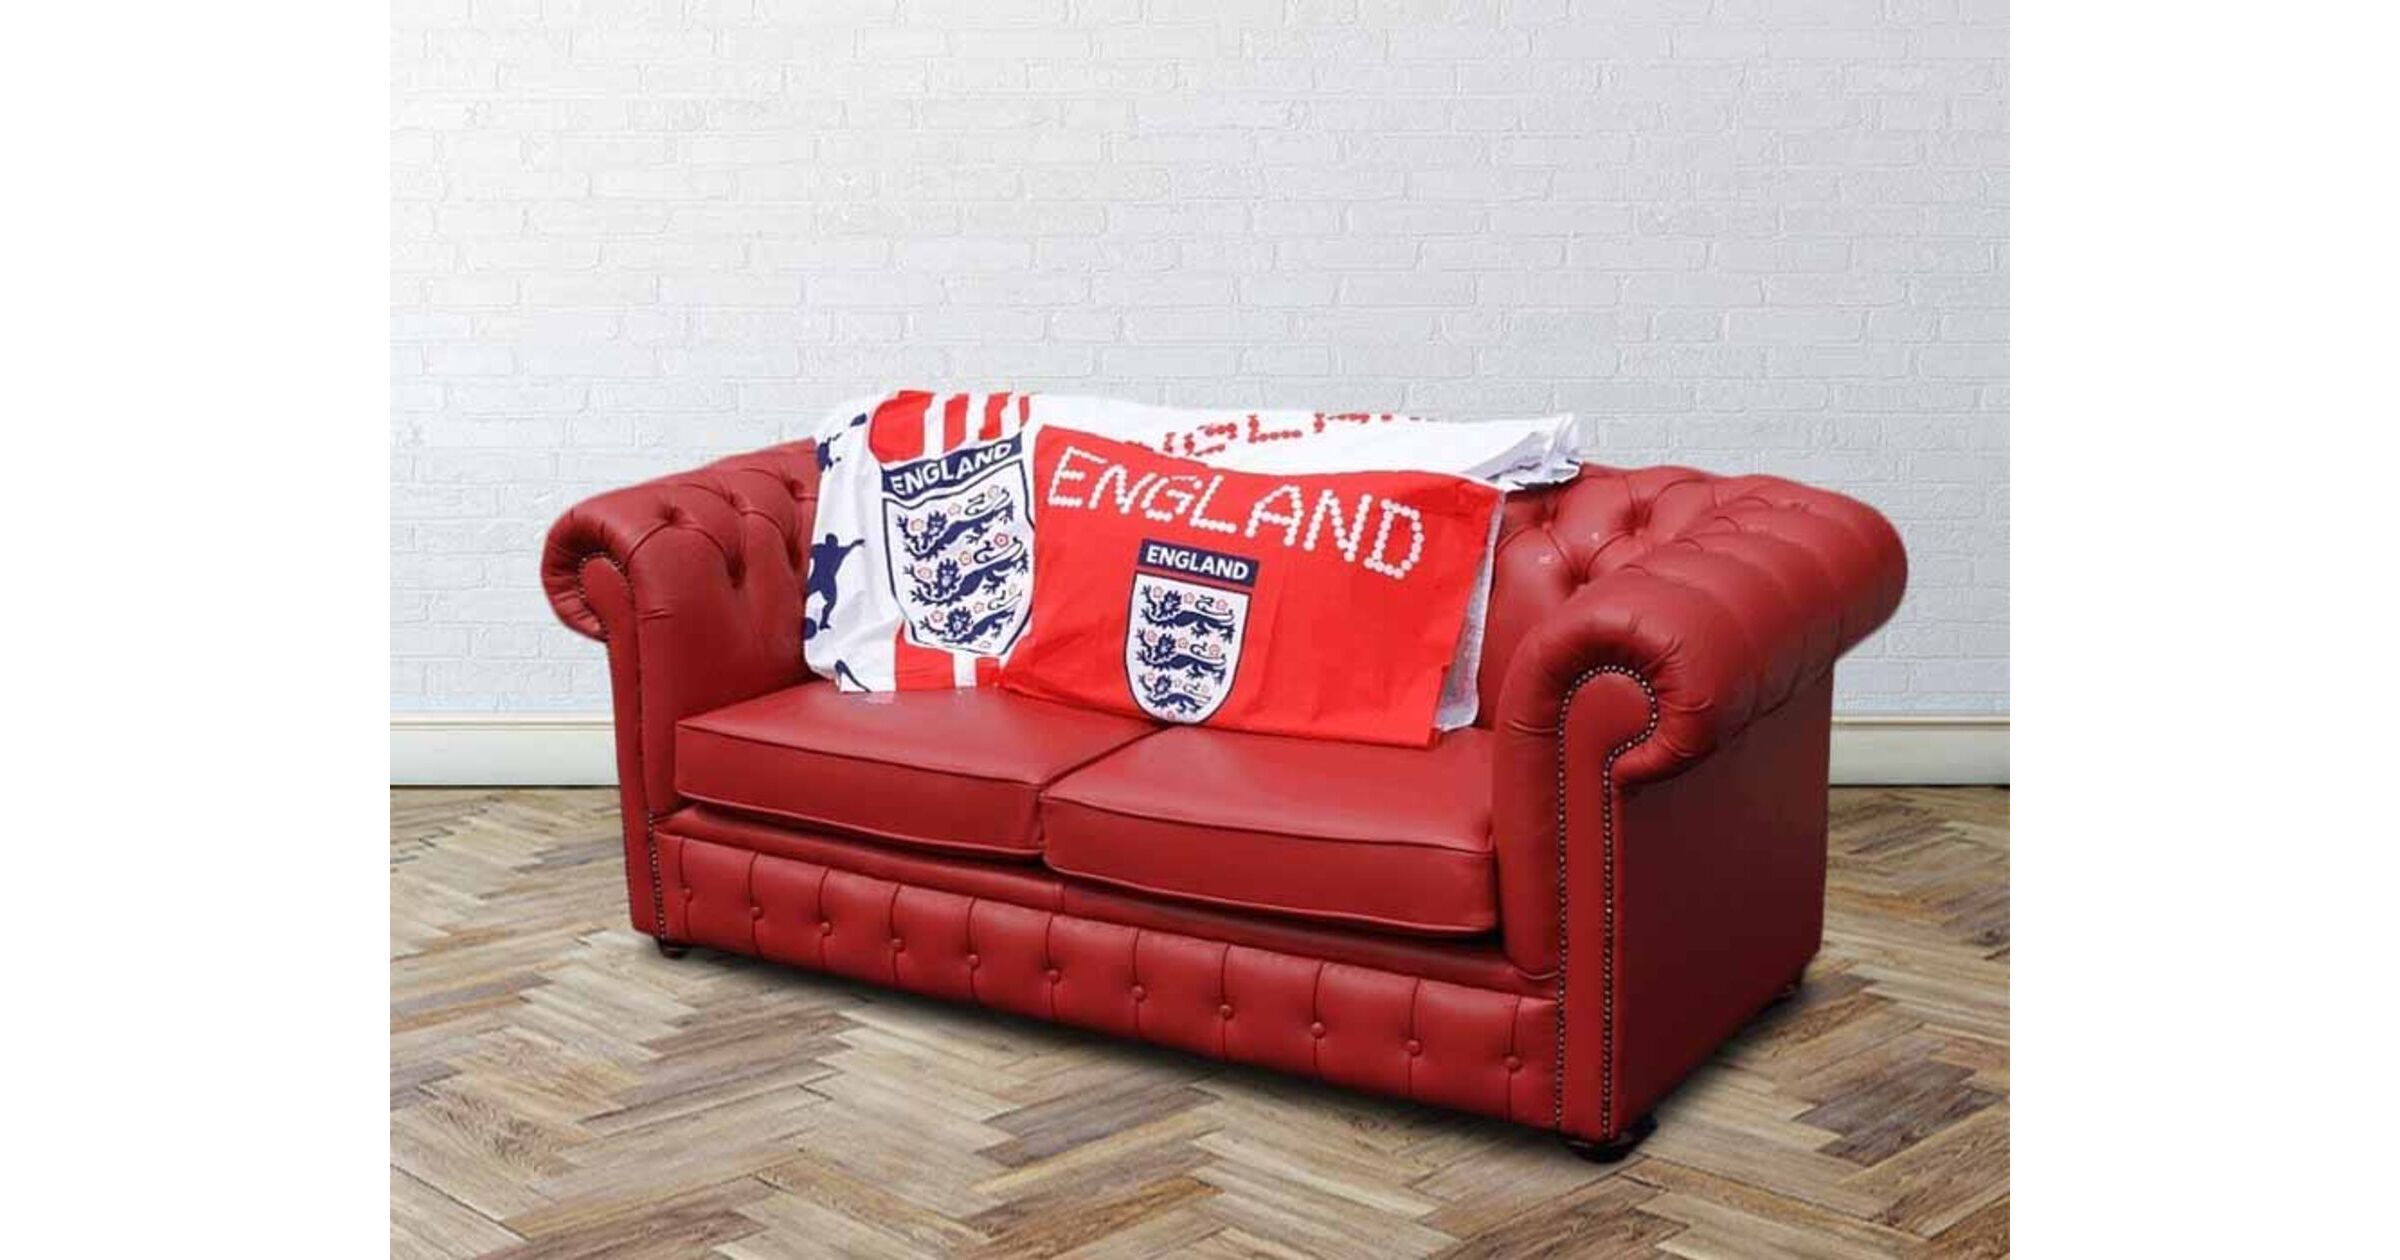 Buy England Sofa Bed Red Chesterfield Designersofas4u